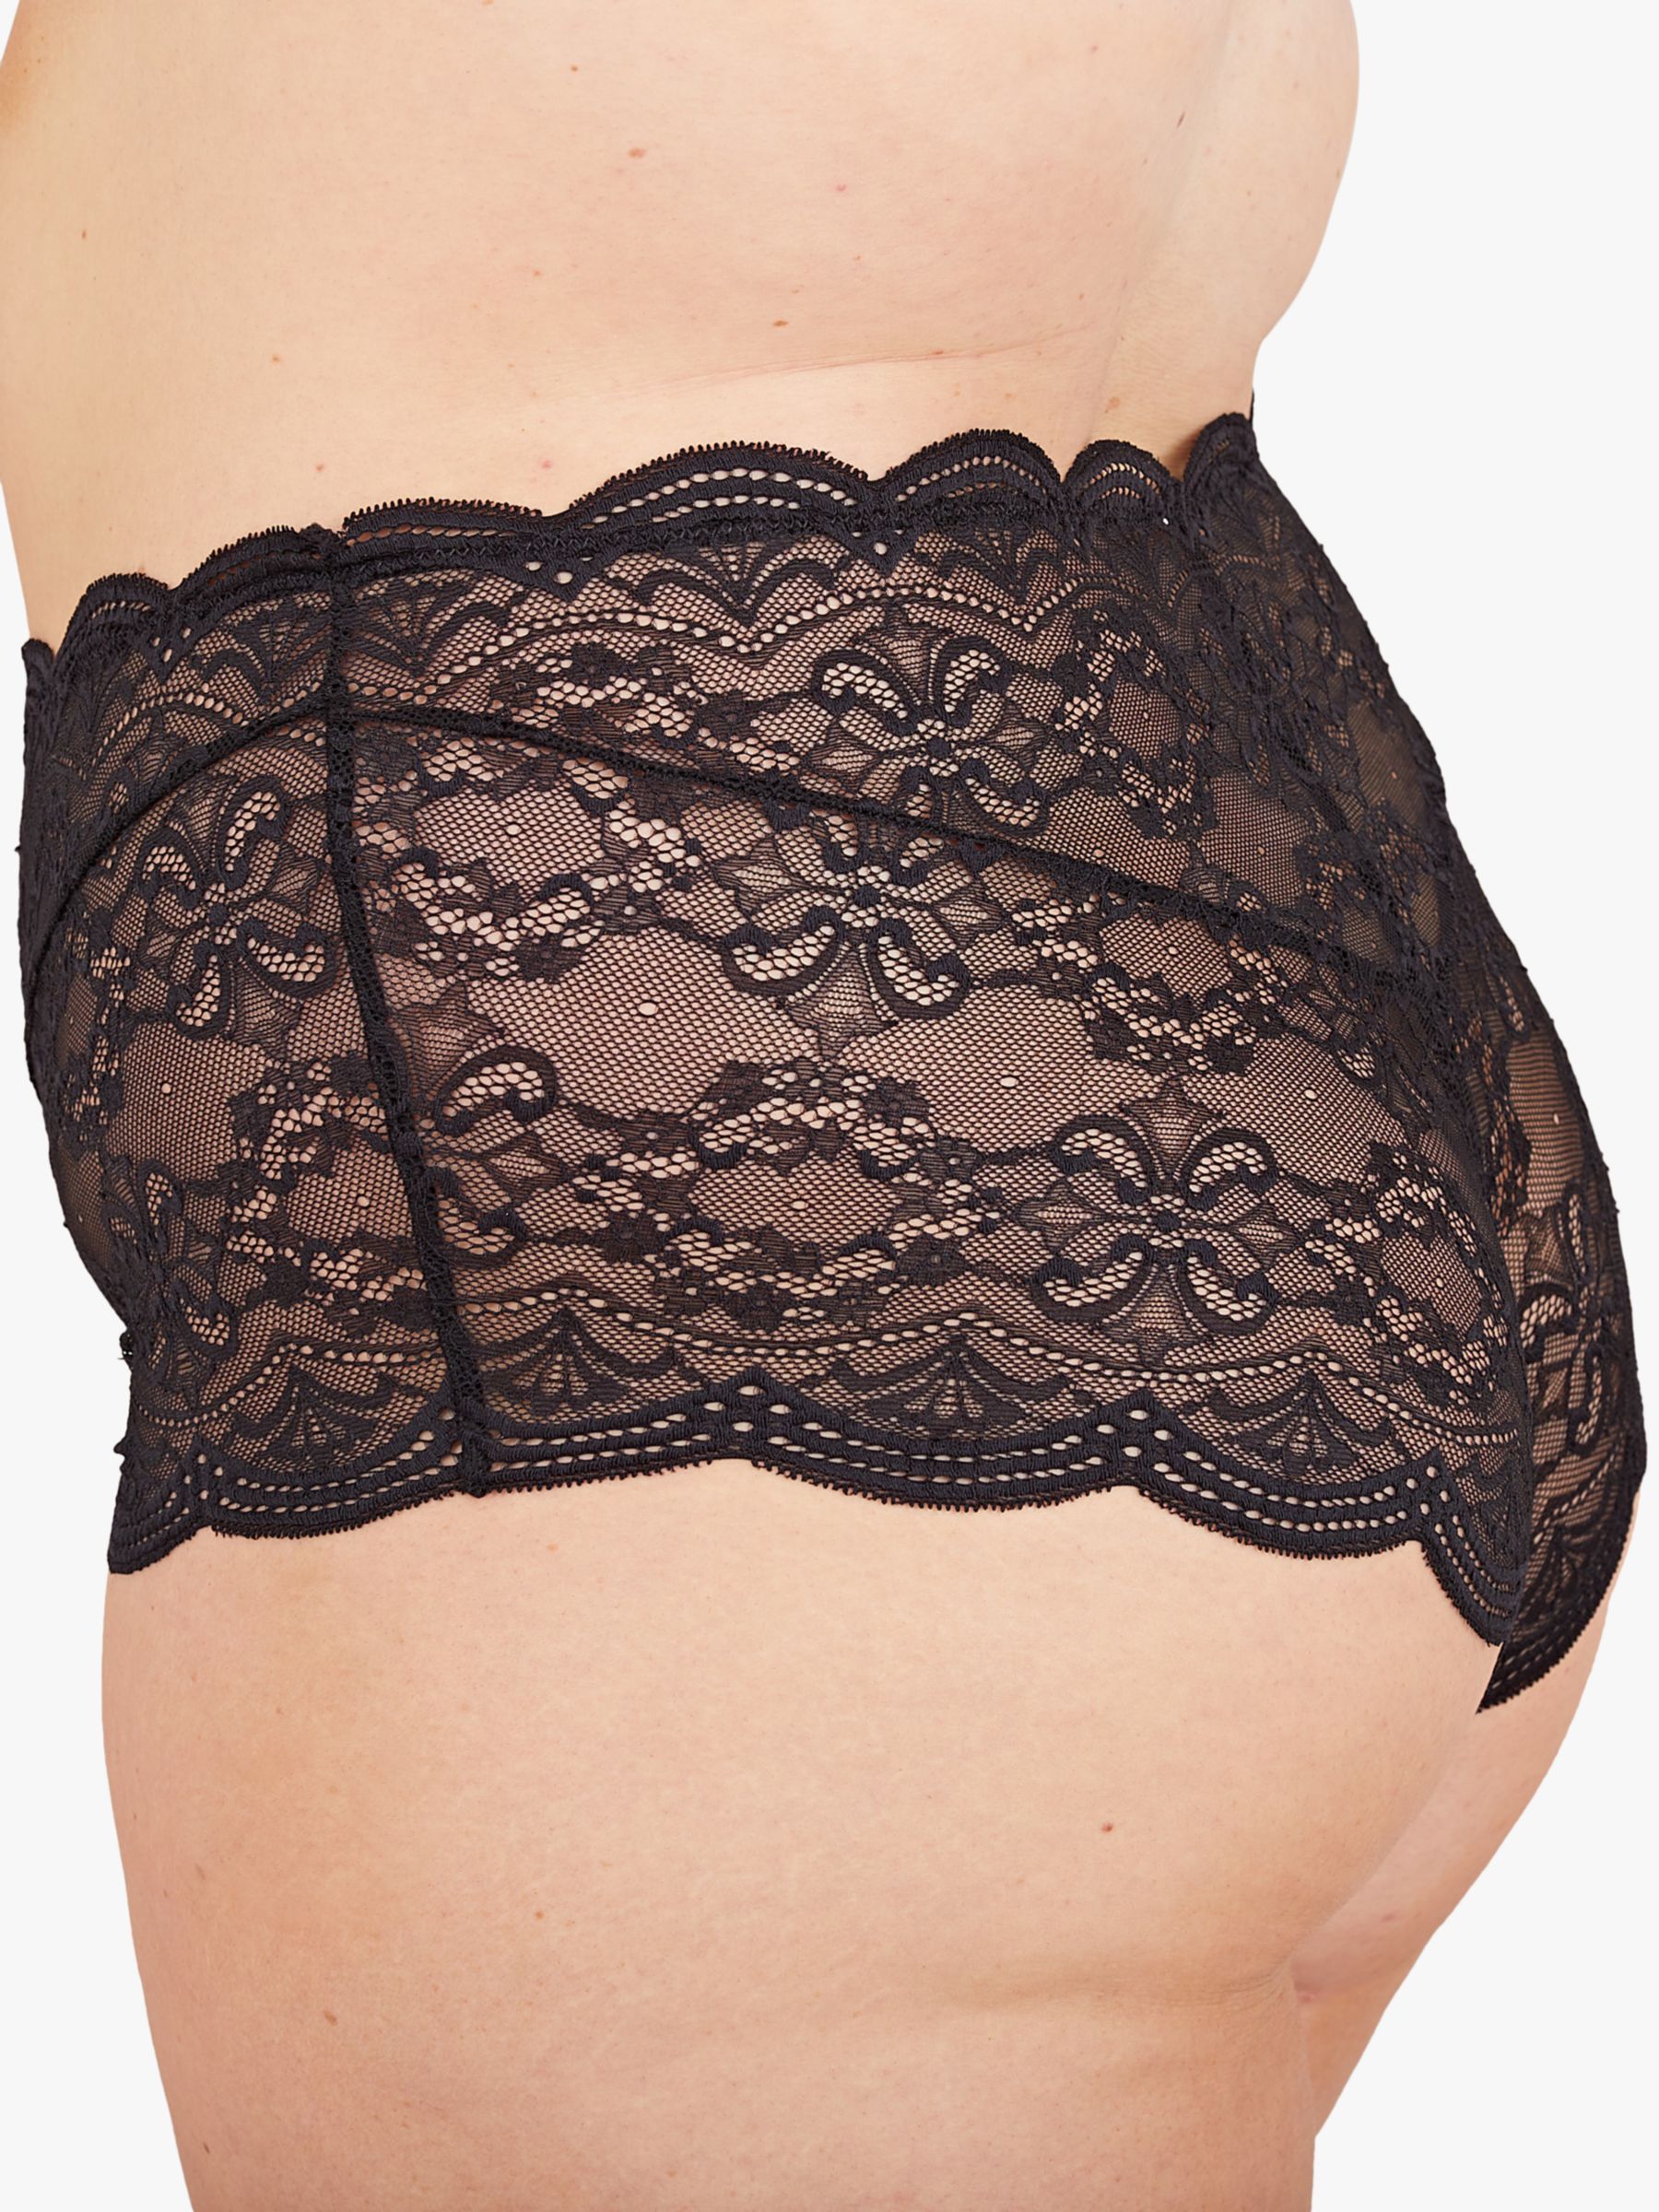 Oola Lingerie Scallop Lace Short Knickers, Black, 14-16